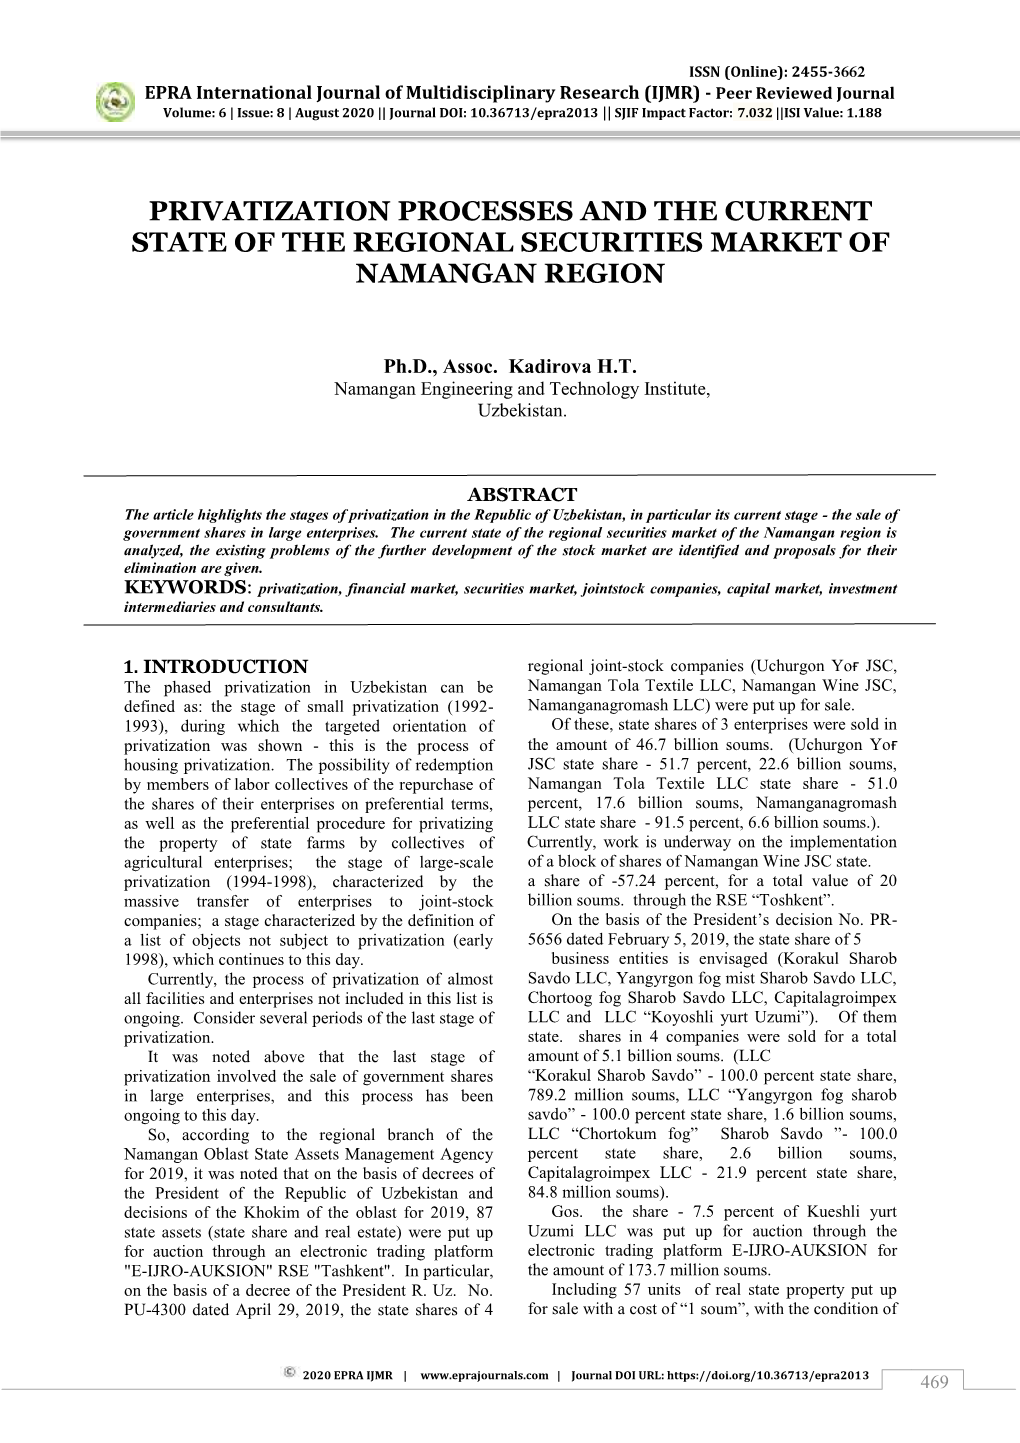 Privatization Processes and the Current State of the Regional Securities Market of Namangan Region